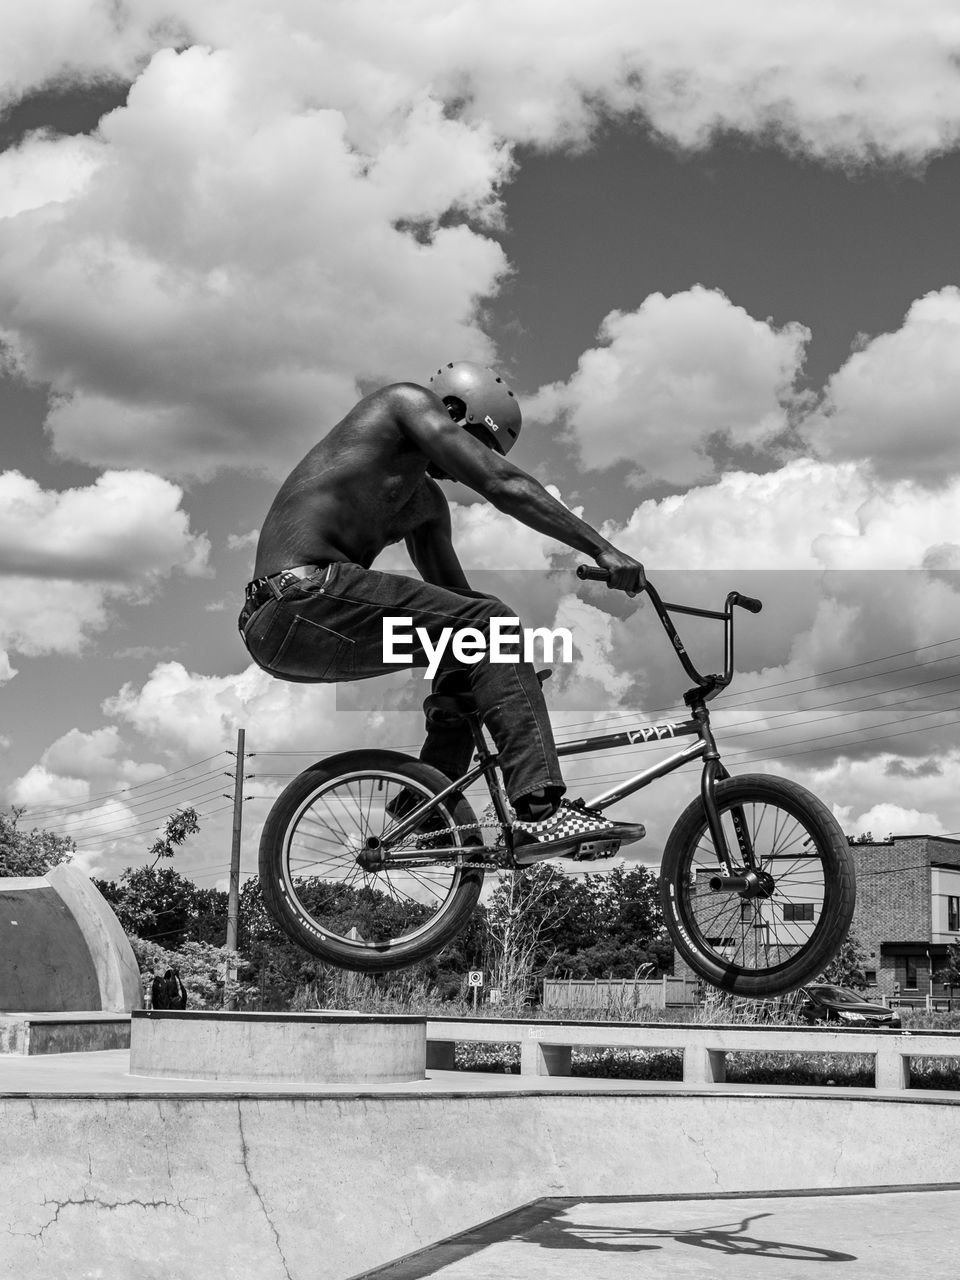 sports, bicycle, cycle sport, cloud, bicycle motocross, transportation, one person, bmx cycling, stunt, activity, sky, black and white, men, cycling, motion, bmx bike, full length, lifestyles, adult, extreme sports, monochrome, leisure activity, skill, vehicle, city, nature, architecture, monochrome photography, riding, day, mode of transportation, mid-air, recreation, outdoors, young adult, sports equipment, helmet, risk, vitality, low angle view, youth culture, headwear, exercising, city life, skateboard park, jumping, casual clothing